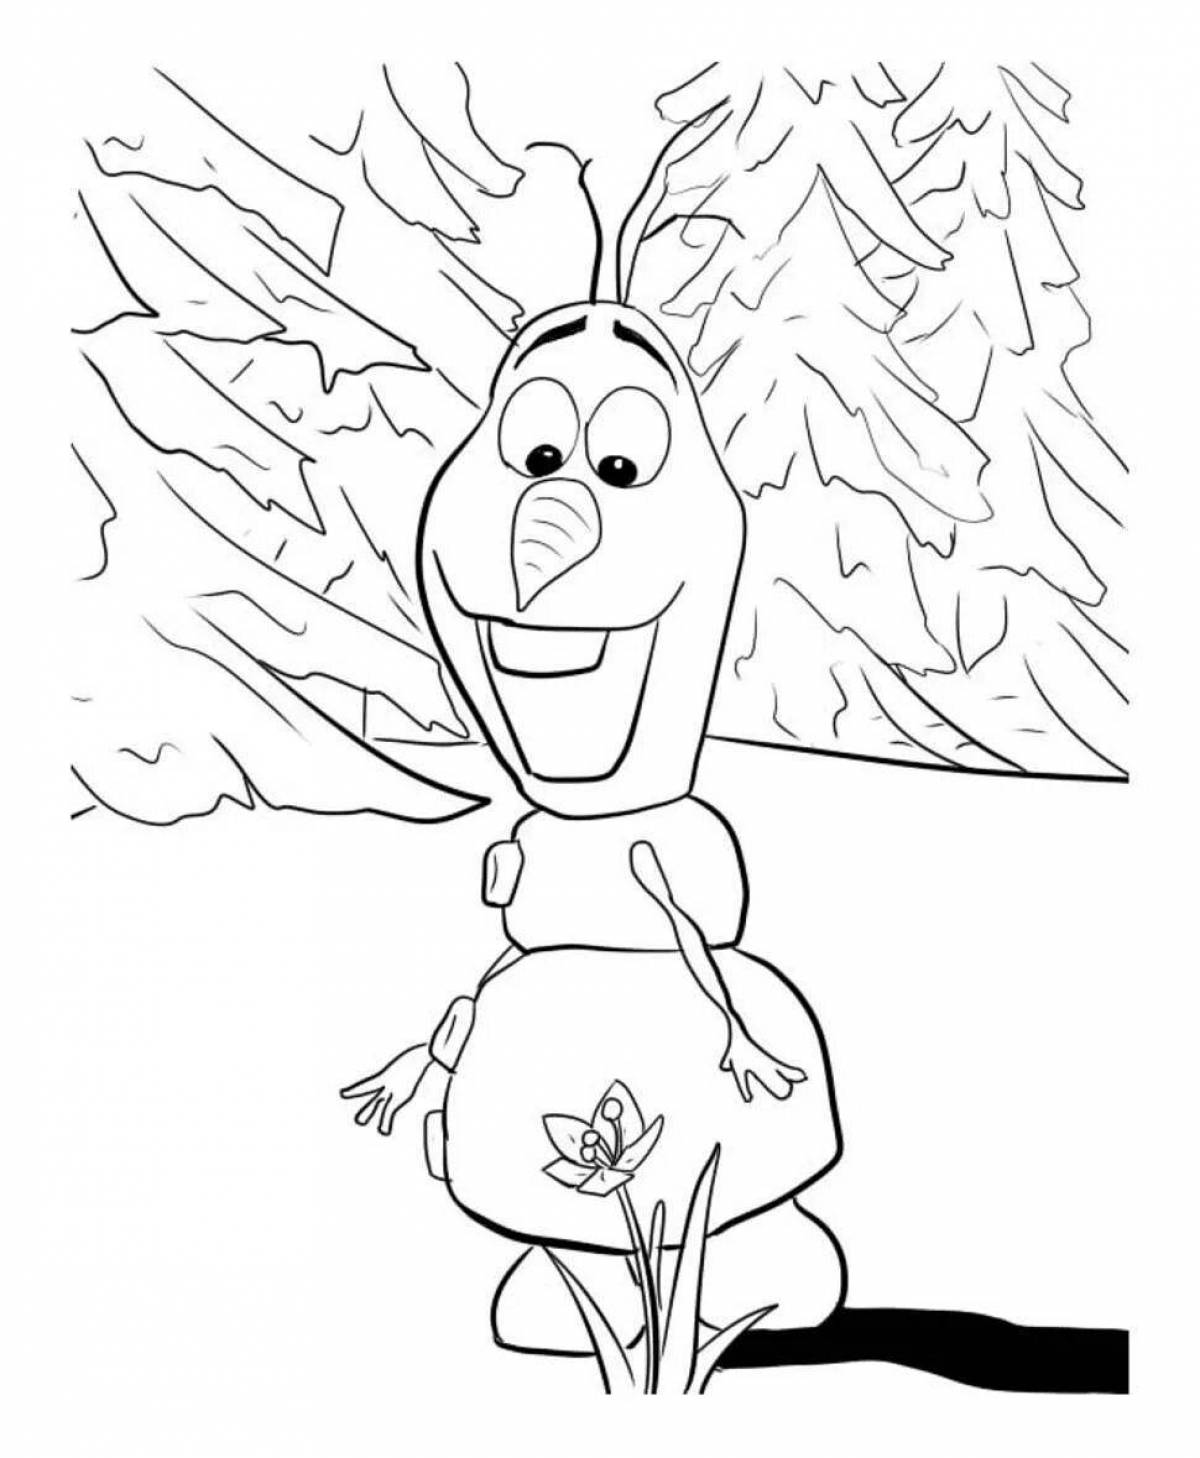 Olav playful coloring page